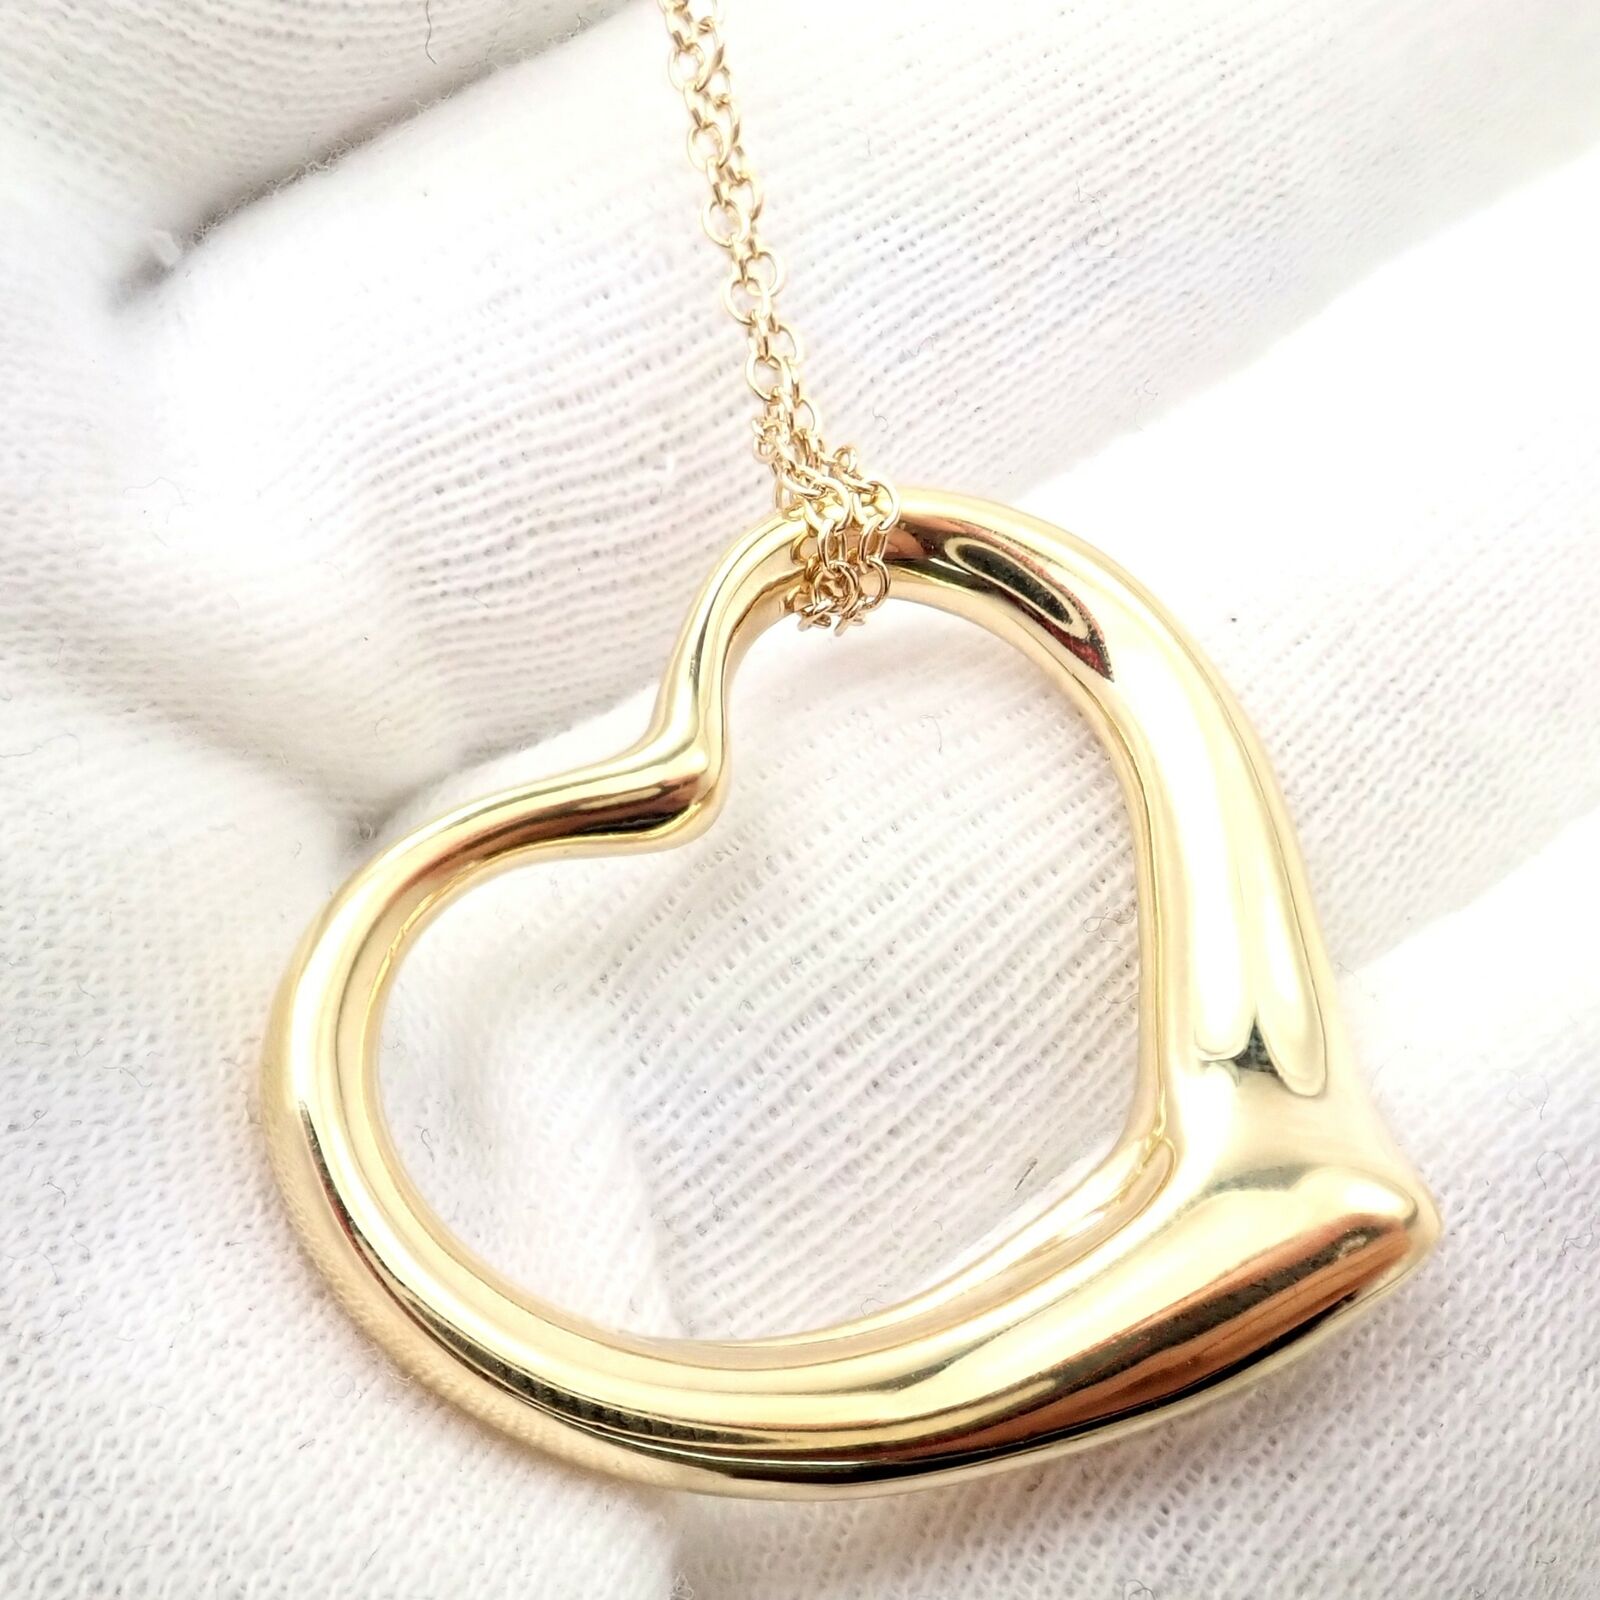 Tiffany & Co. Jewelry & Watches:Fine Jewelry:Necklaces & Pendants Tiffany & Co 18k Yellow Gold Peretti Extra Large Open Heart Pendant Necklace